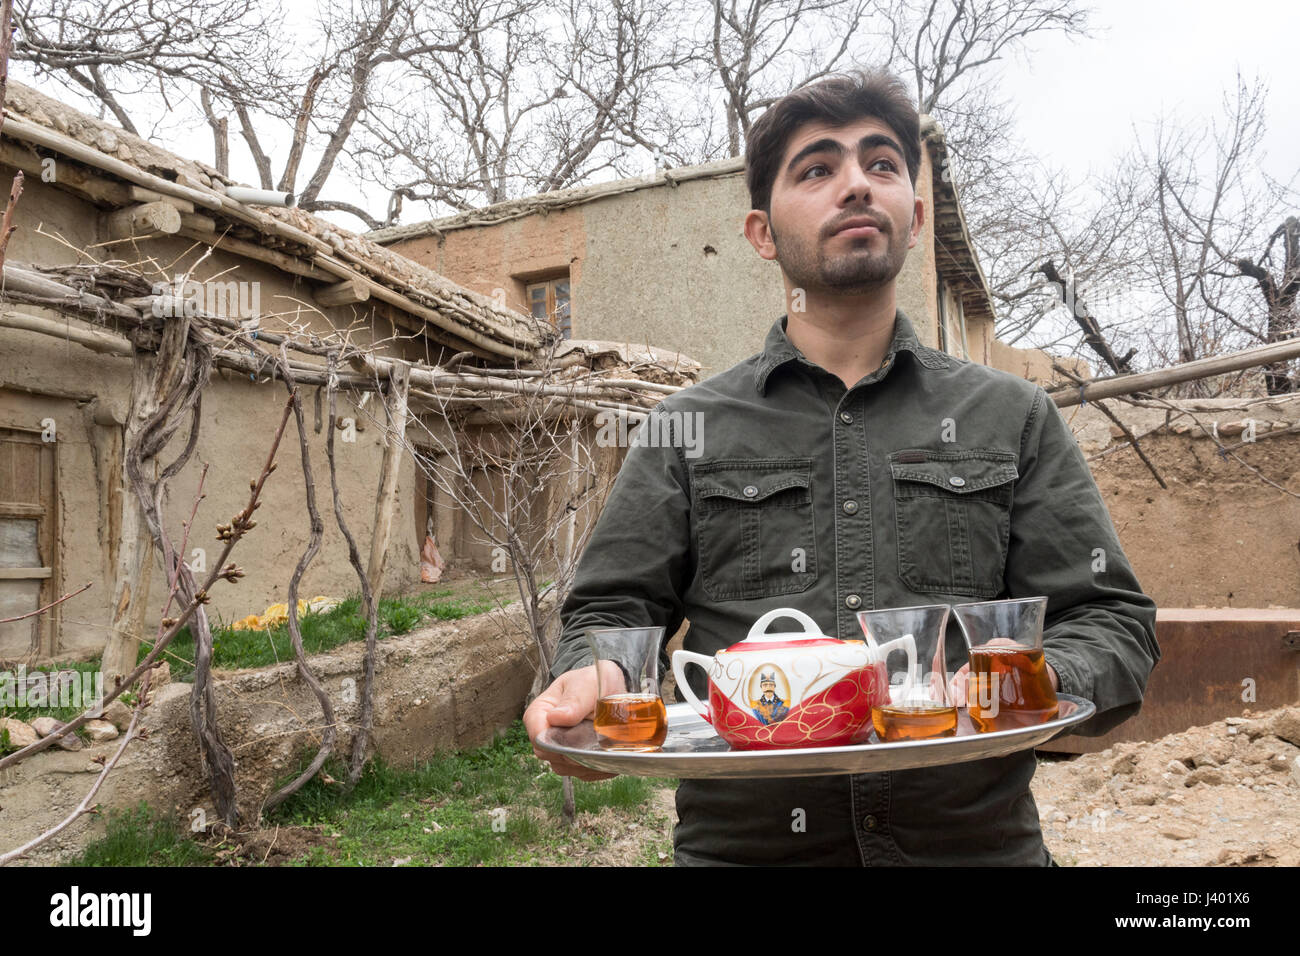 Ali, A Guesthouse Owner Holding A Tray With A Teapot Decorated WIth The Image of Qajar King Nasseredin Shah, Rooieen (Ruin), A Traditional Rural Villa Stock Photo